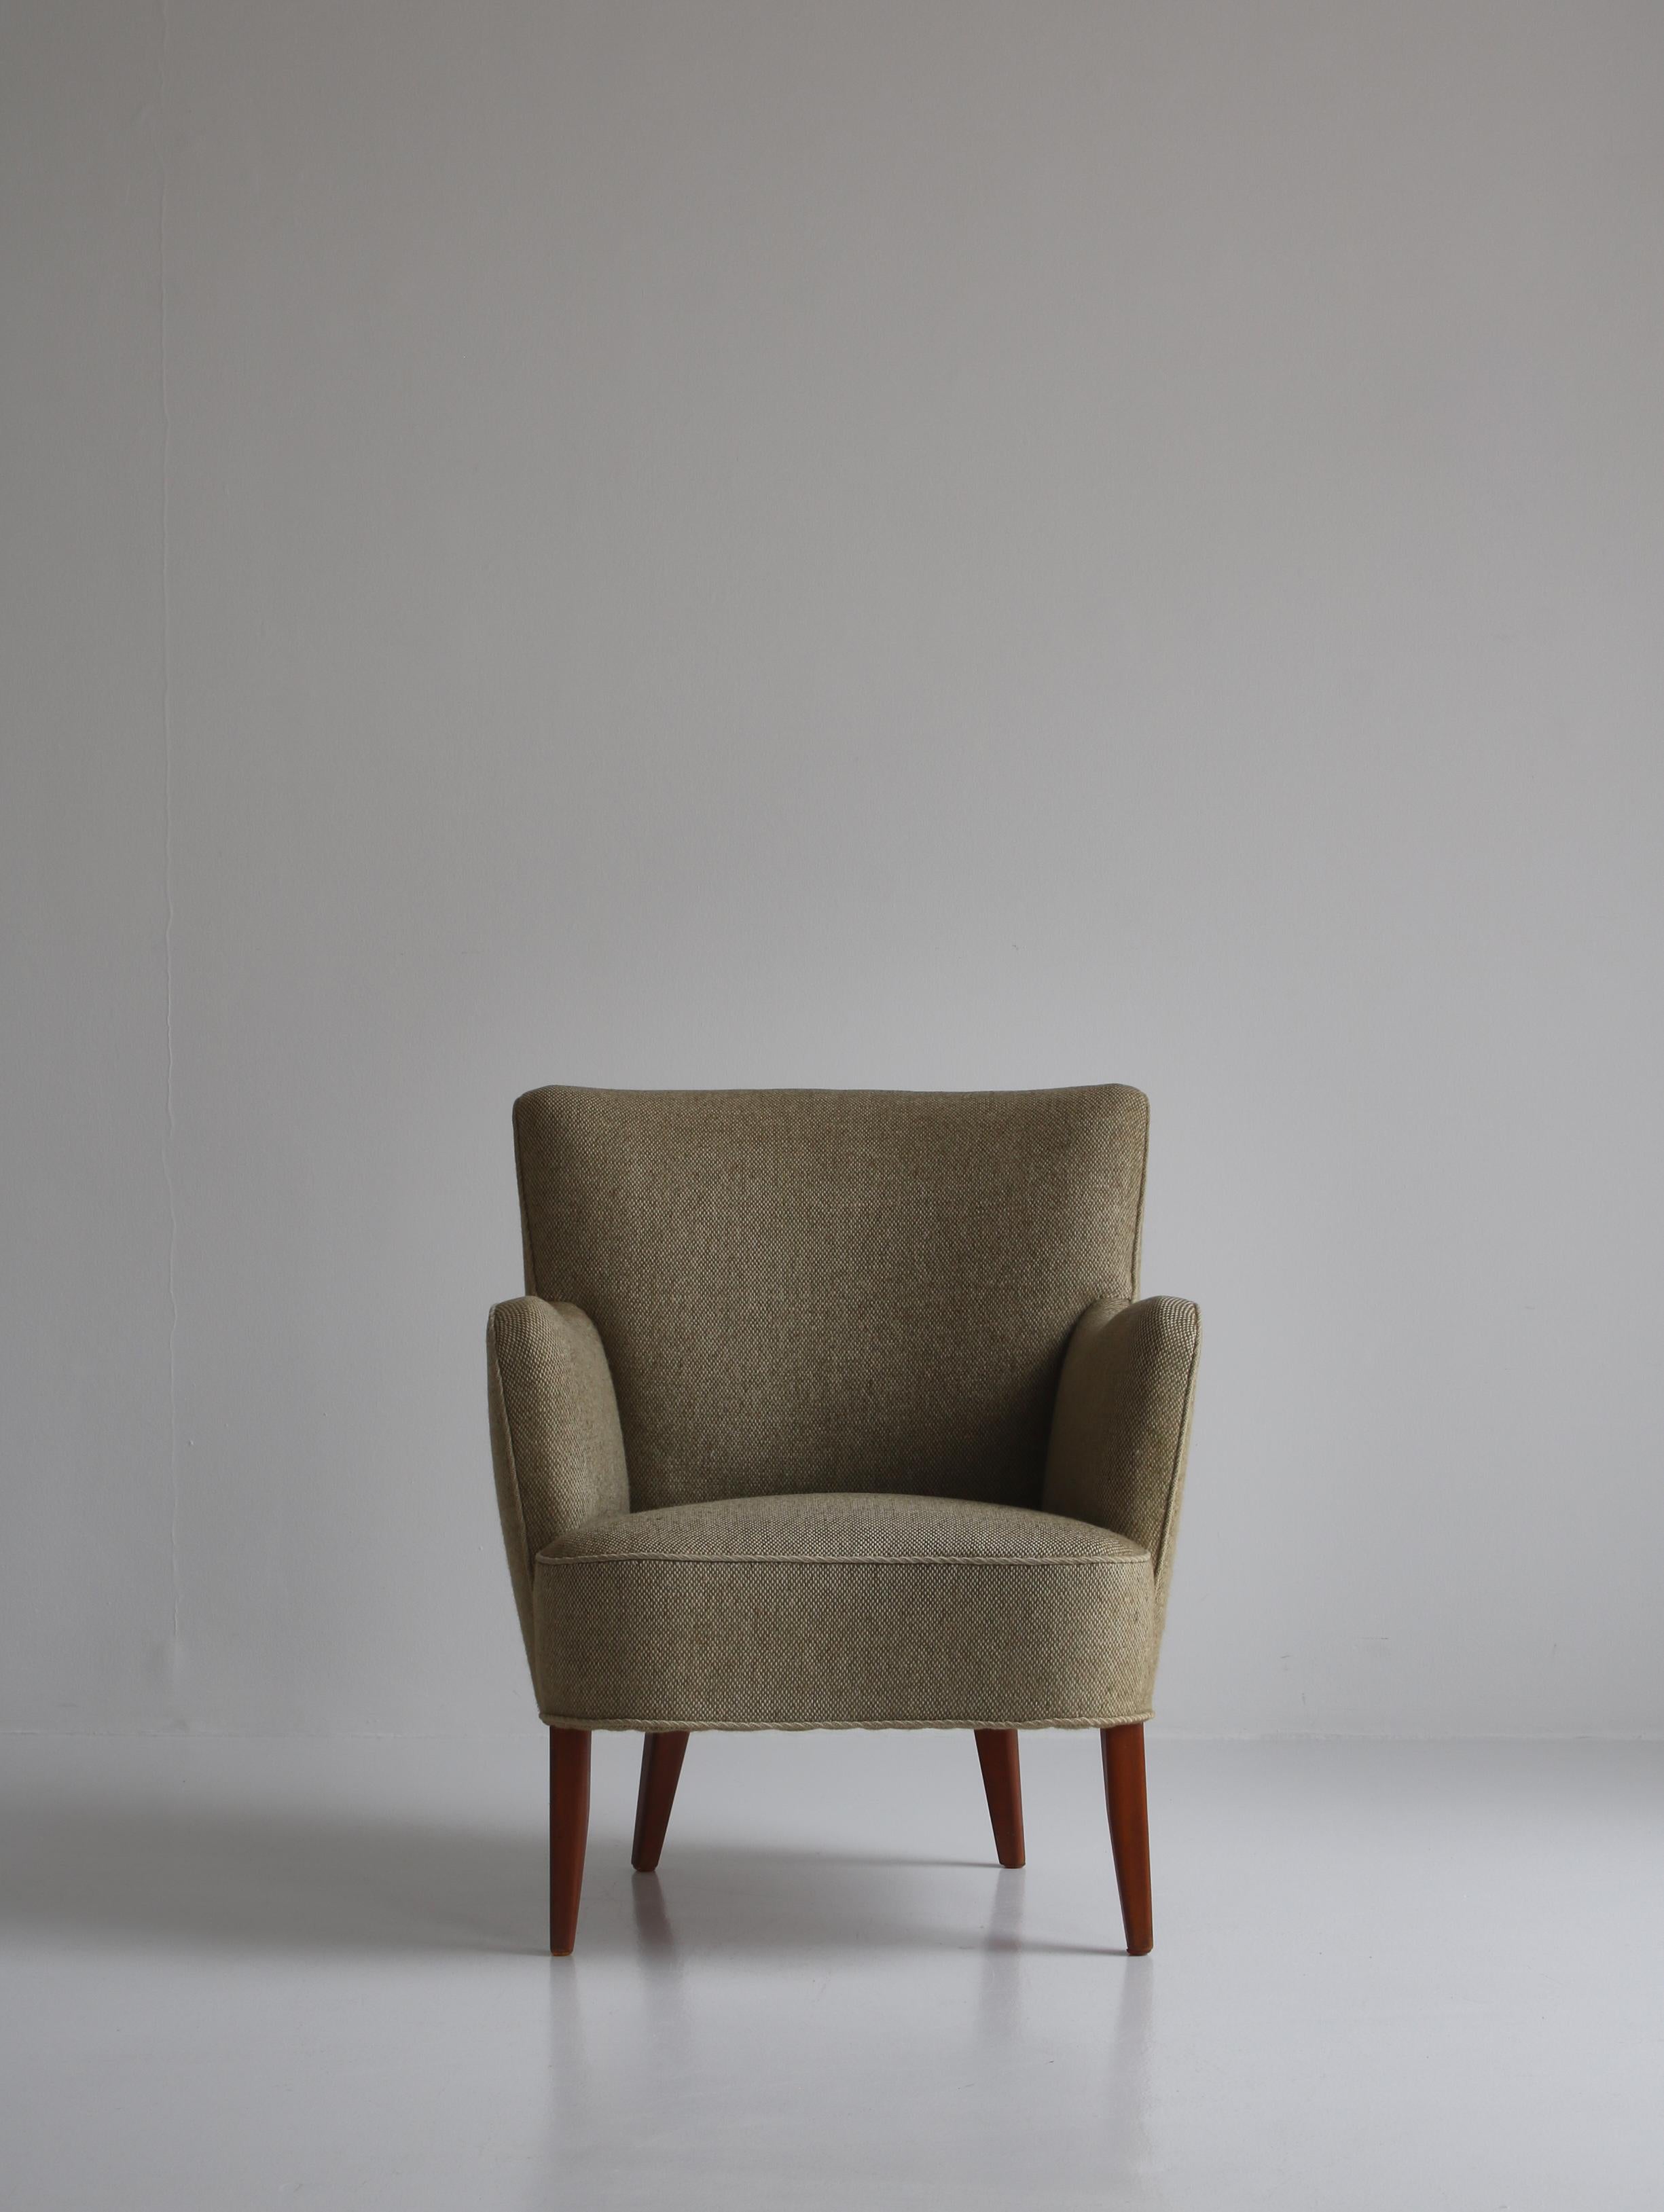 Charming vintage easy chair made in the 1950s in Denmark and attributed to Peter Hvidt & Orla Mølgaard. The chair is in amazing original condition and still has the beautiful original wool upholstery with very few signs of use.